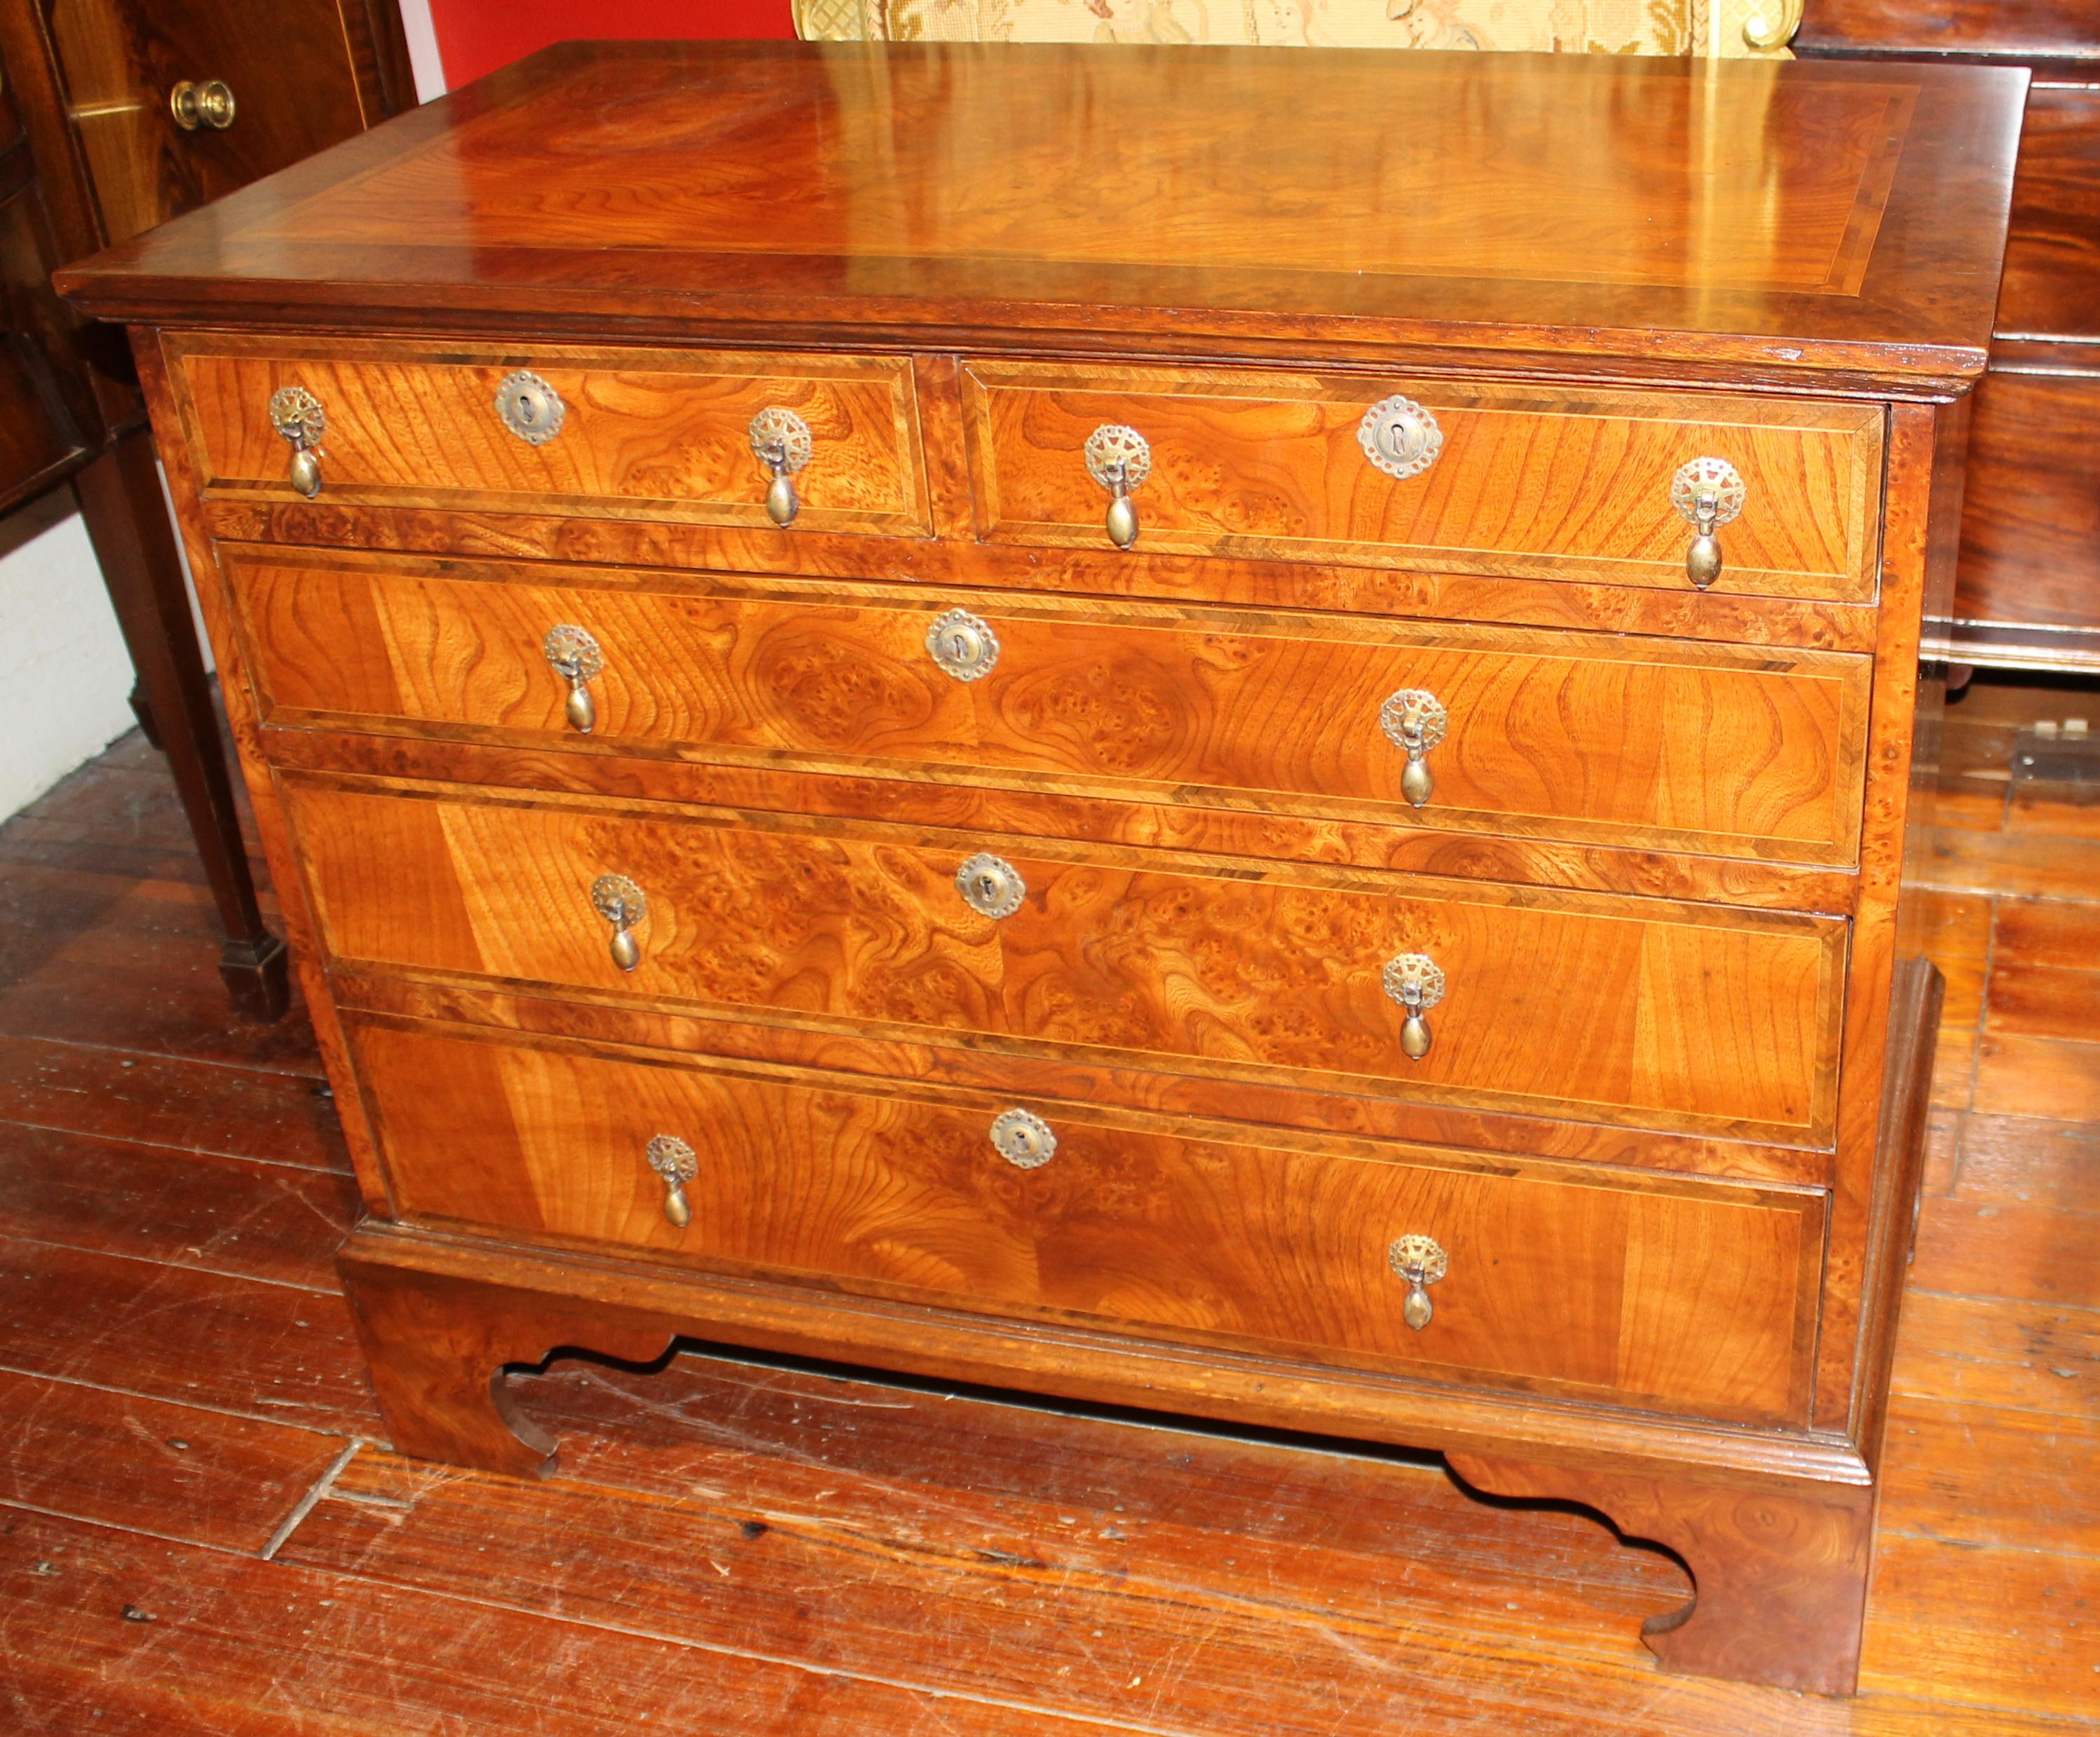 Superb quality antique English inlaid burr elm Queen Anne Revival Bachelor's chest. The Queen Anne Revival period in the mid-19th century borrowed on designs that were prevalent during the Queen Anne period of the early 18th century. Though this is